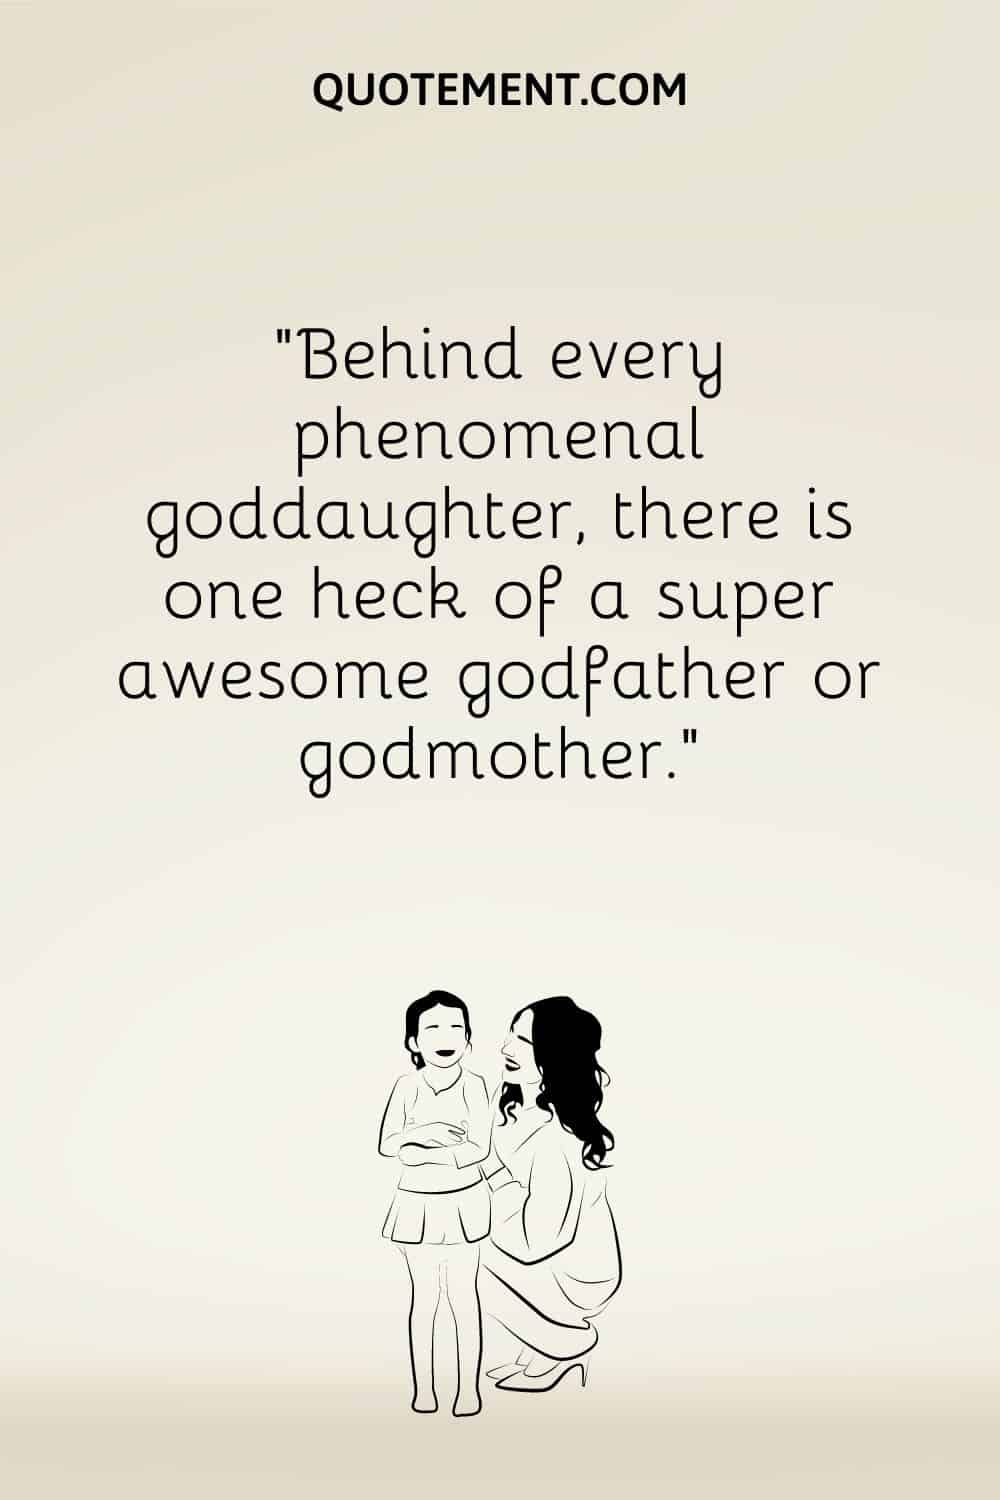 “Behind every phenomenal goddaughter, there is one heck of a super awesome godfather or godmother.”